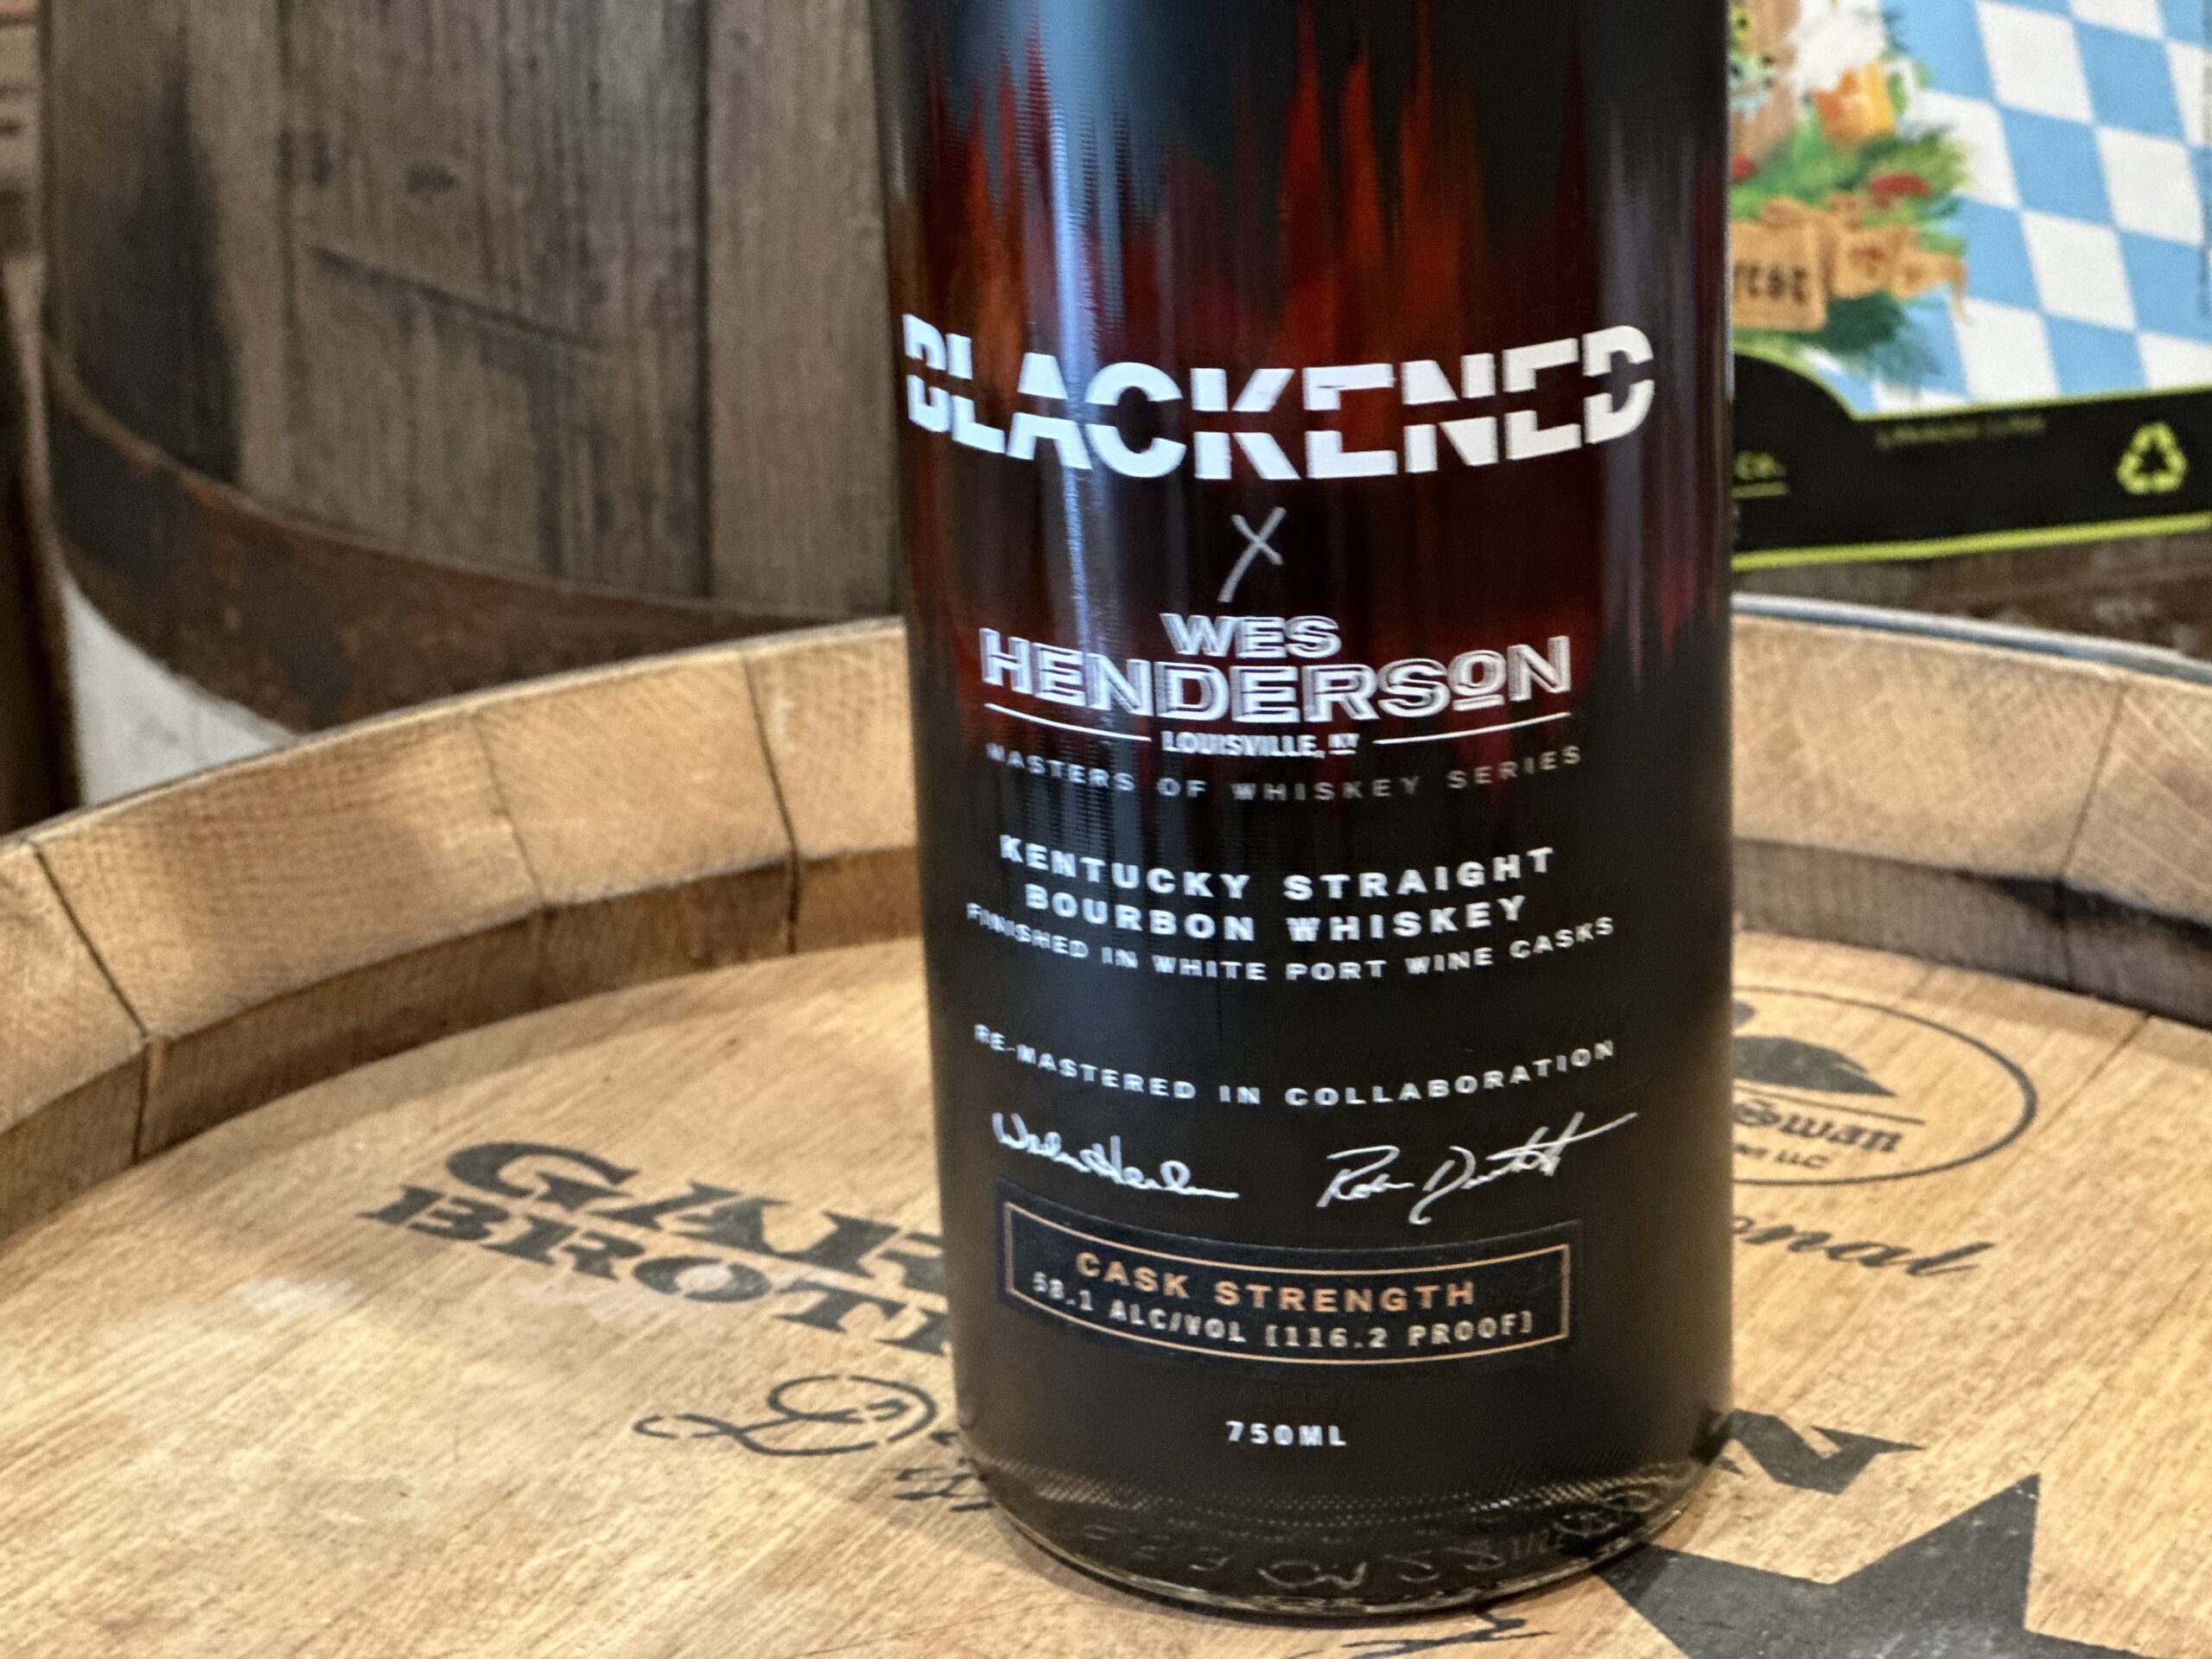 Blackened X Wes Henderson Whiskey Limited Edition